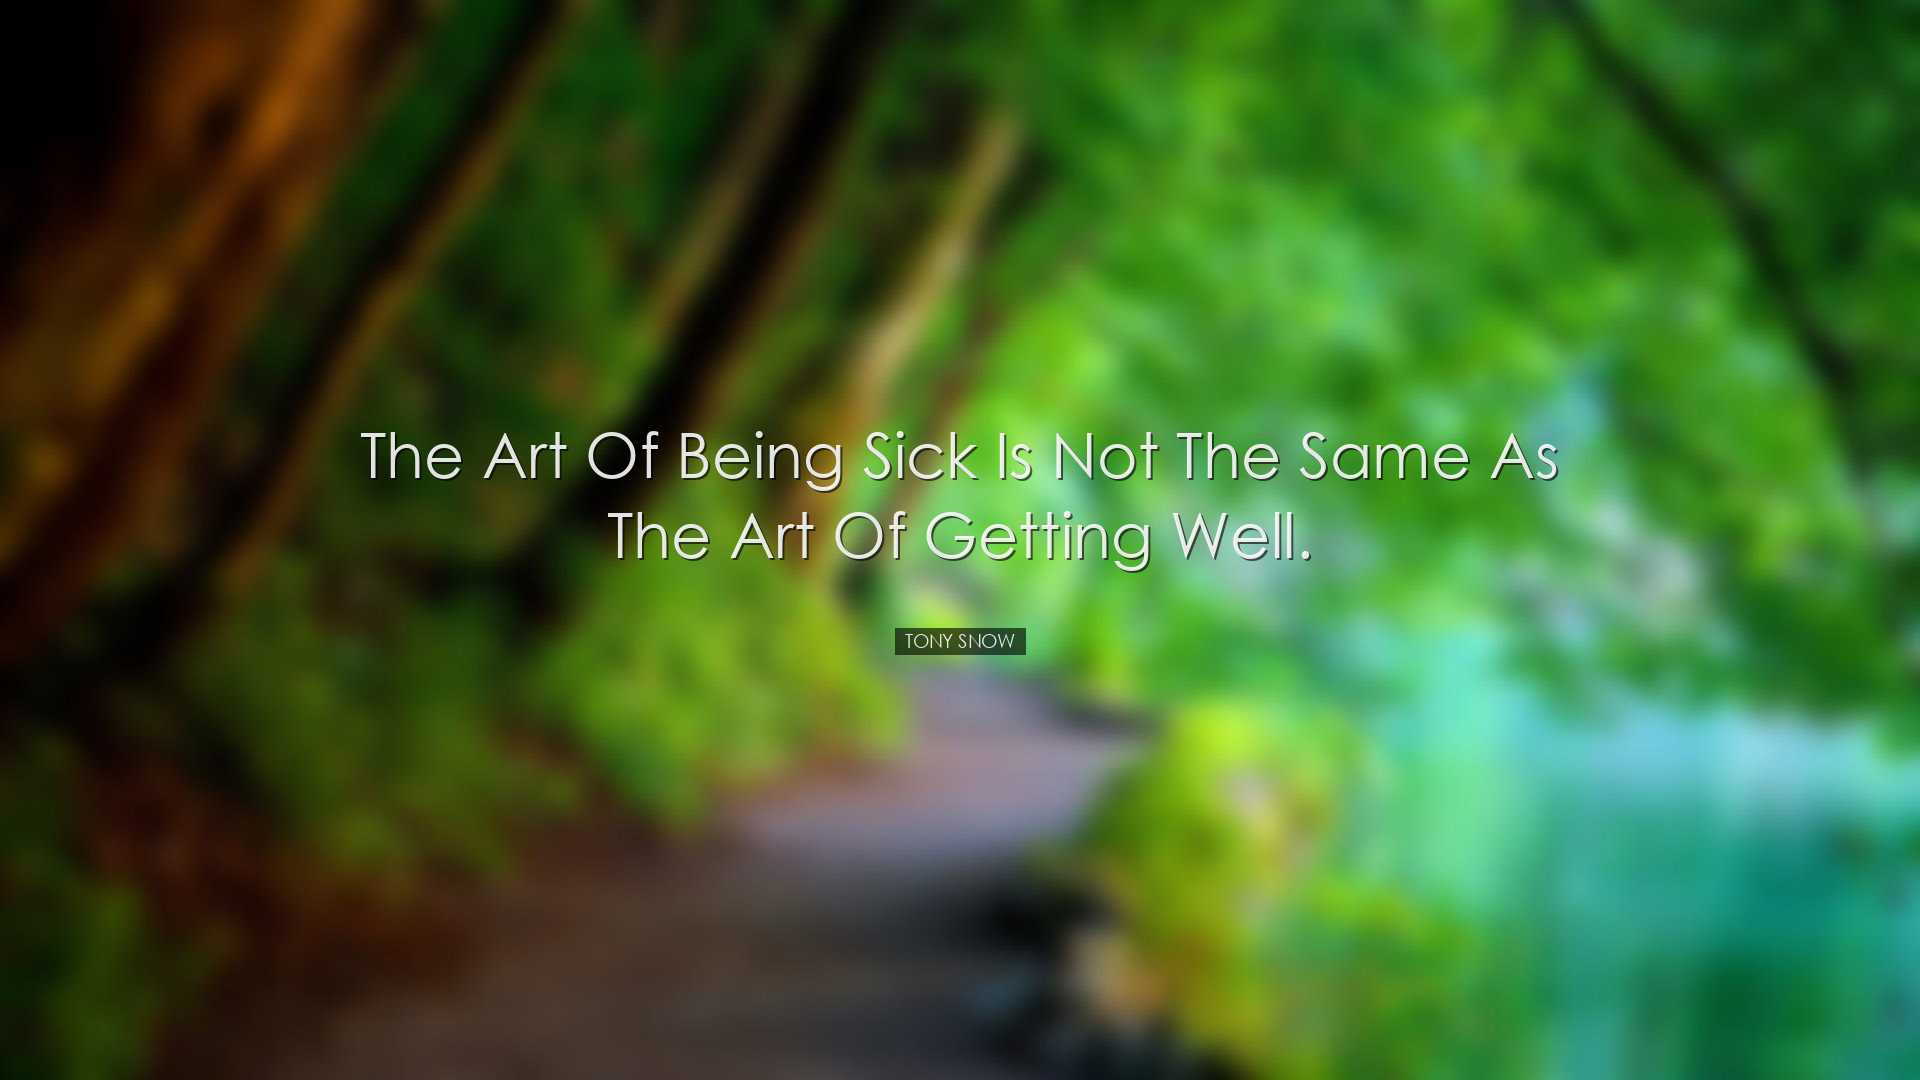 The art of being sick is not the same as the art of getting well.